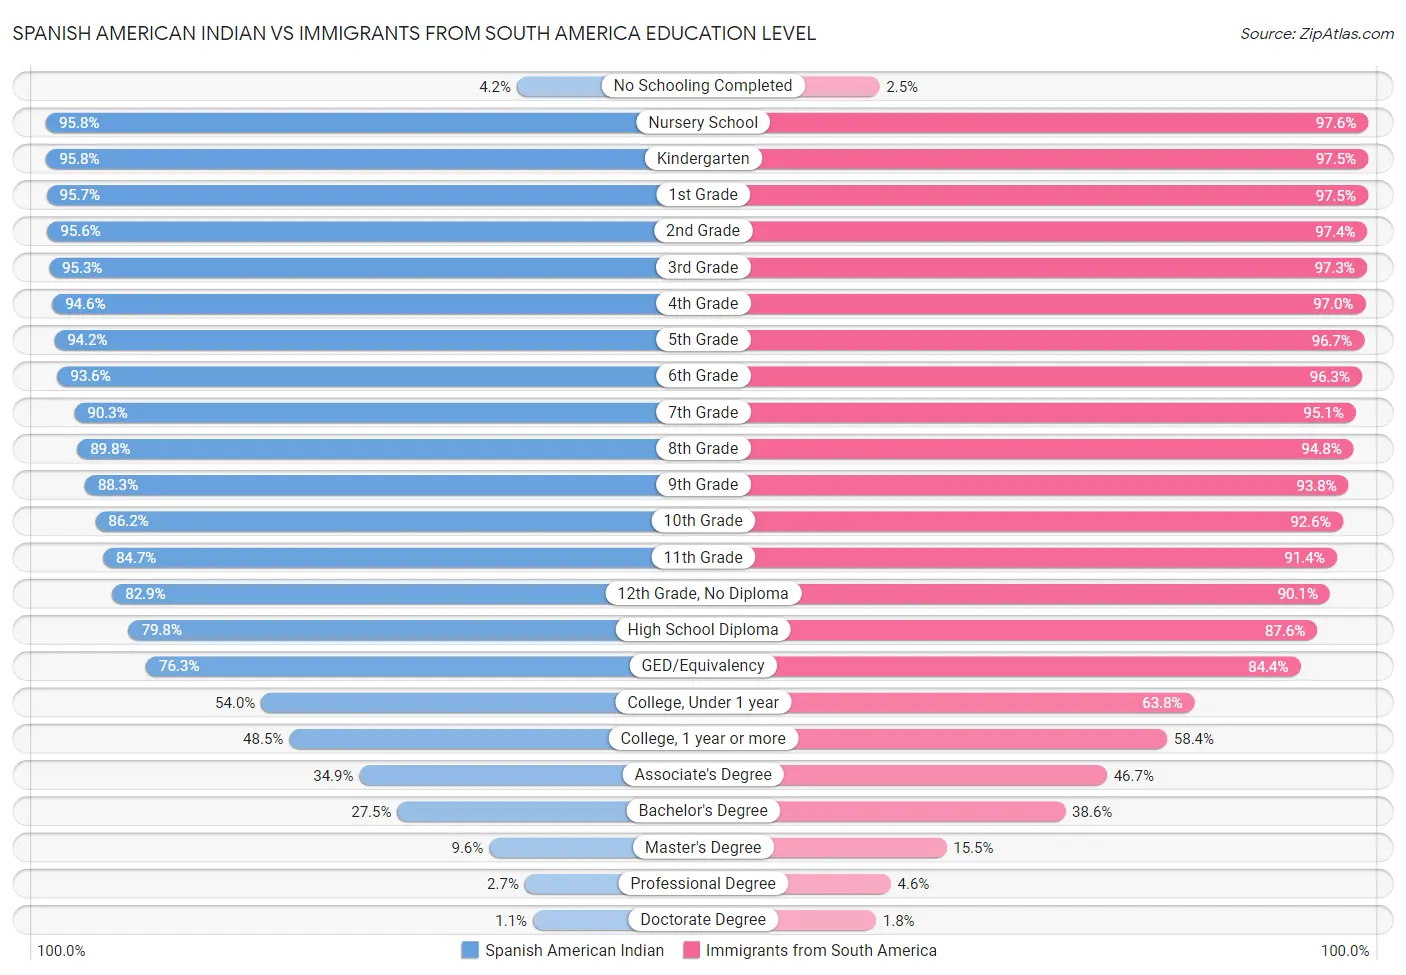 Spanish American Indian vs Immigrants from South America Education Level